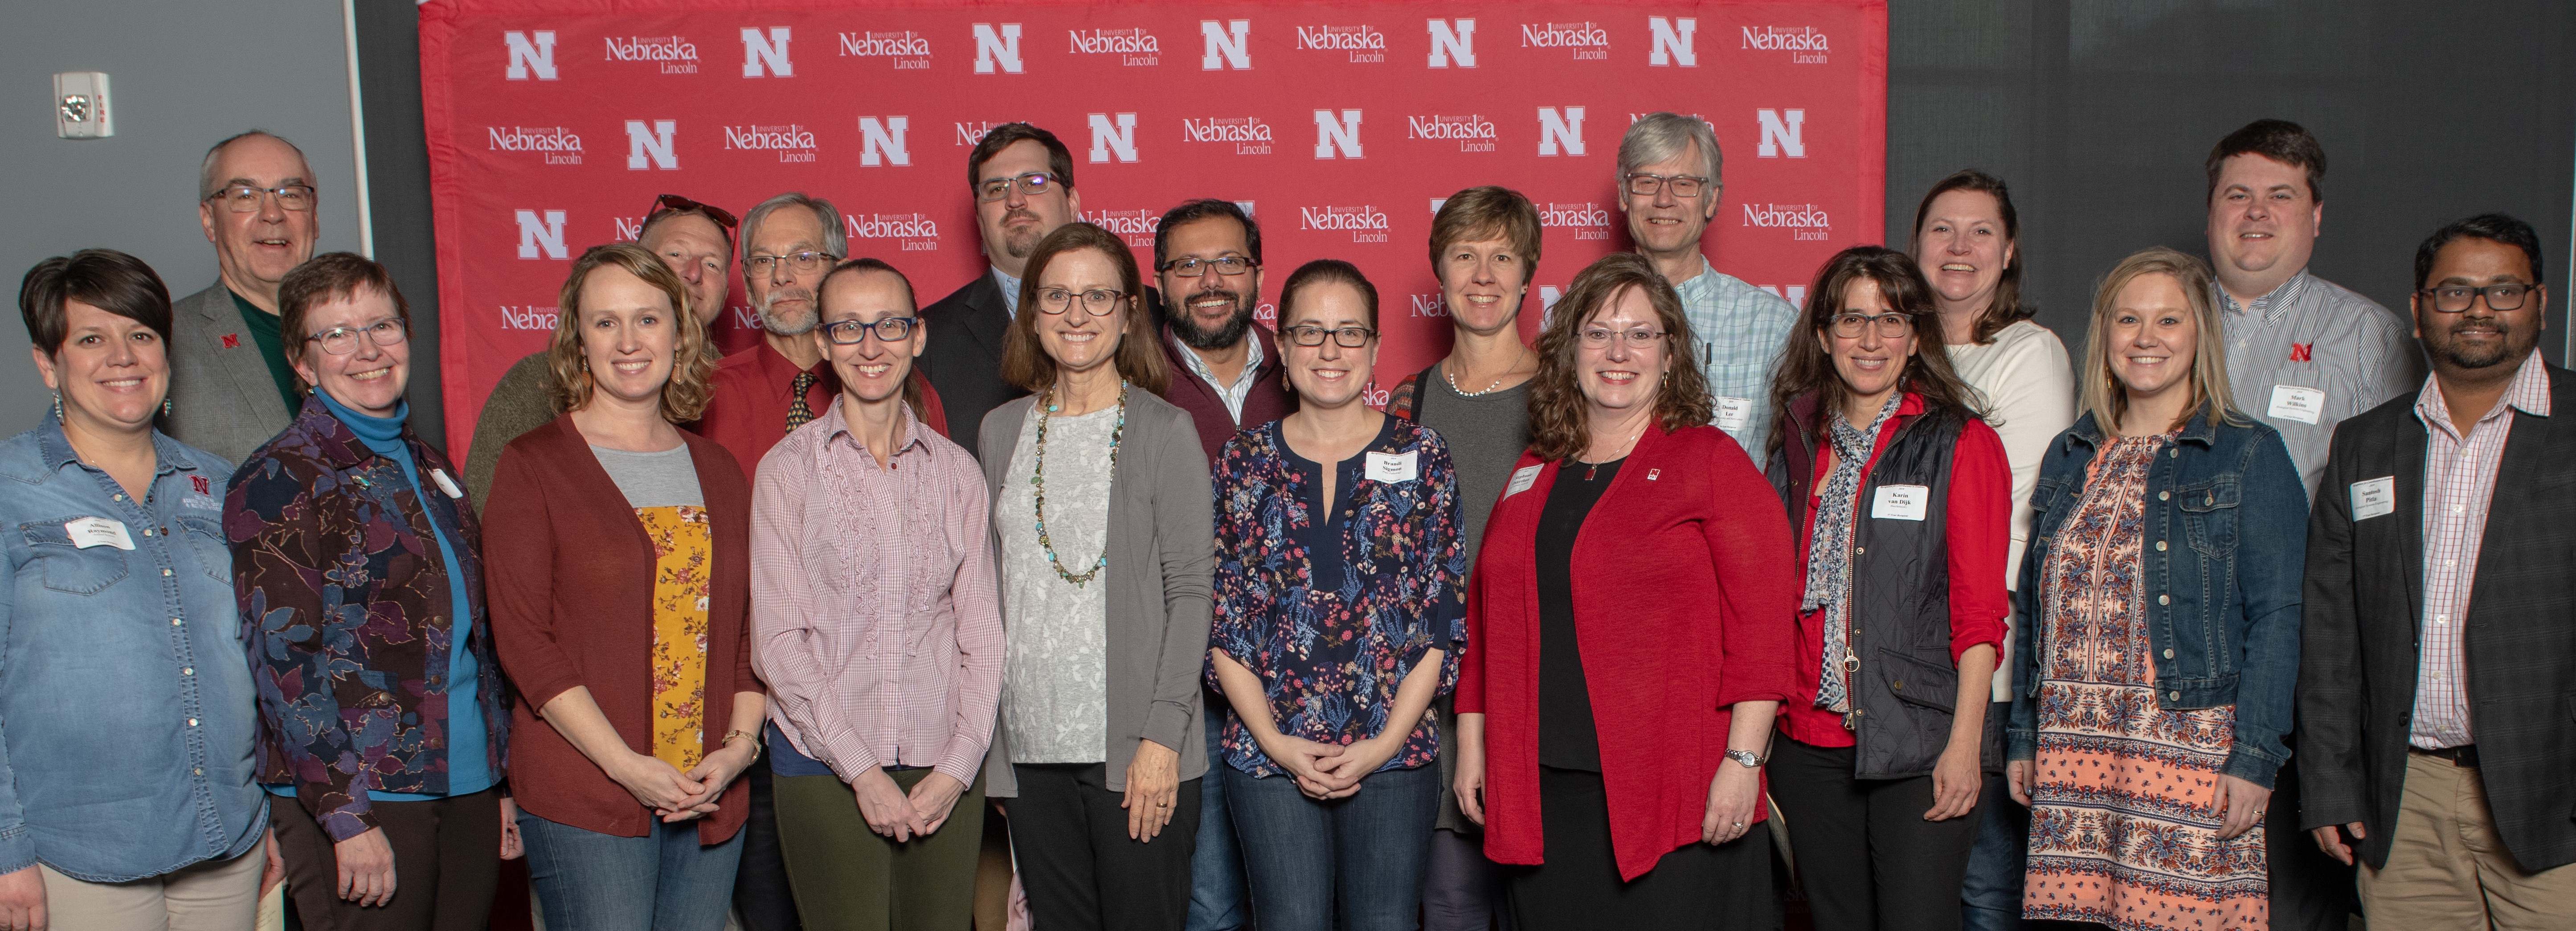 CASNR Faculty and Staff Recognized by Parents of UNL Students